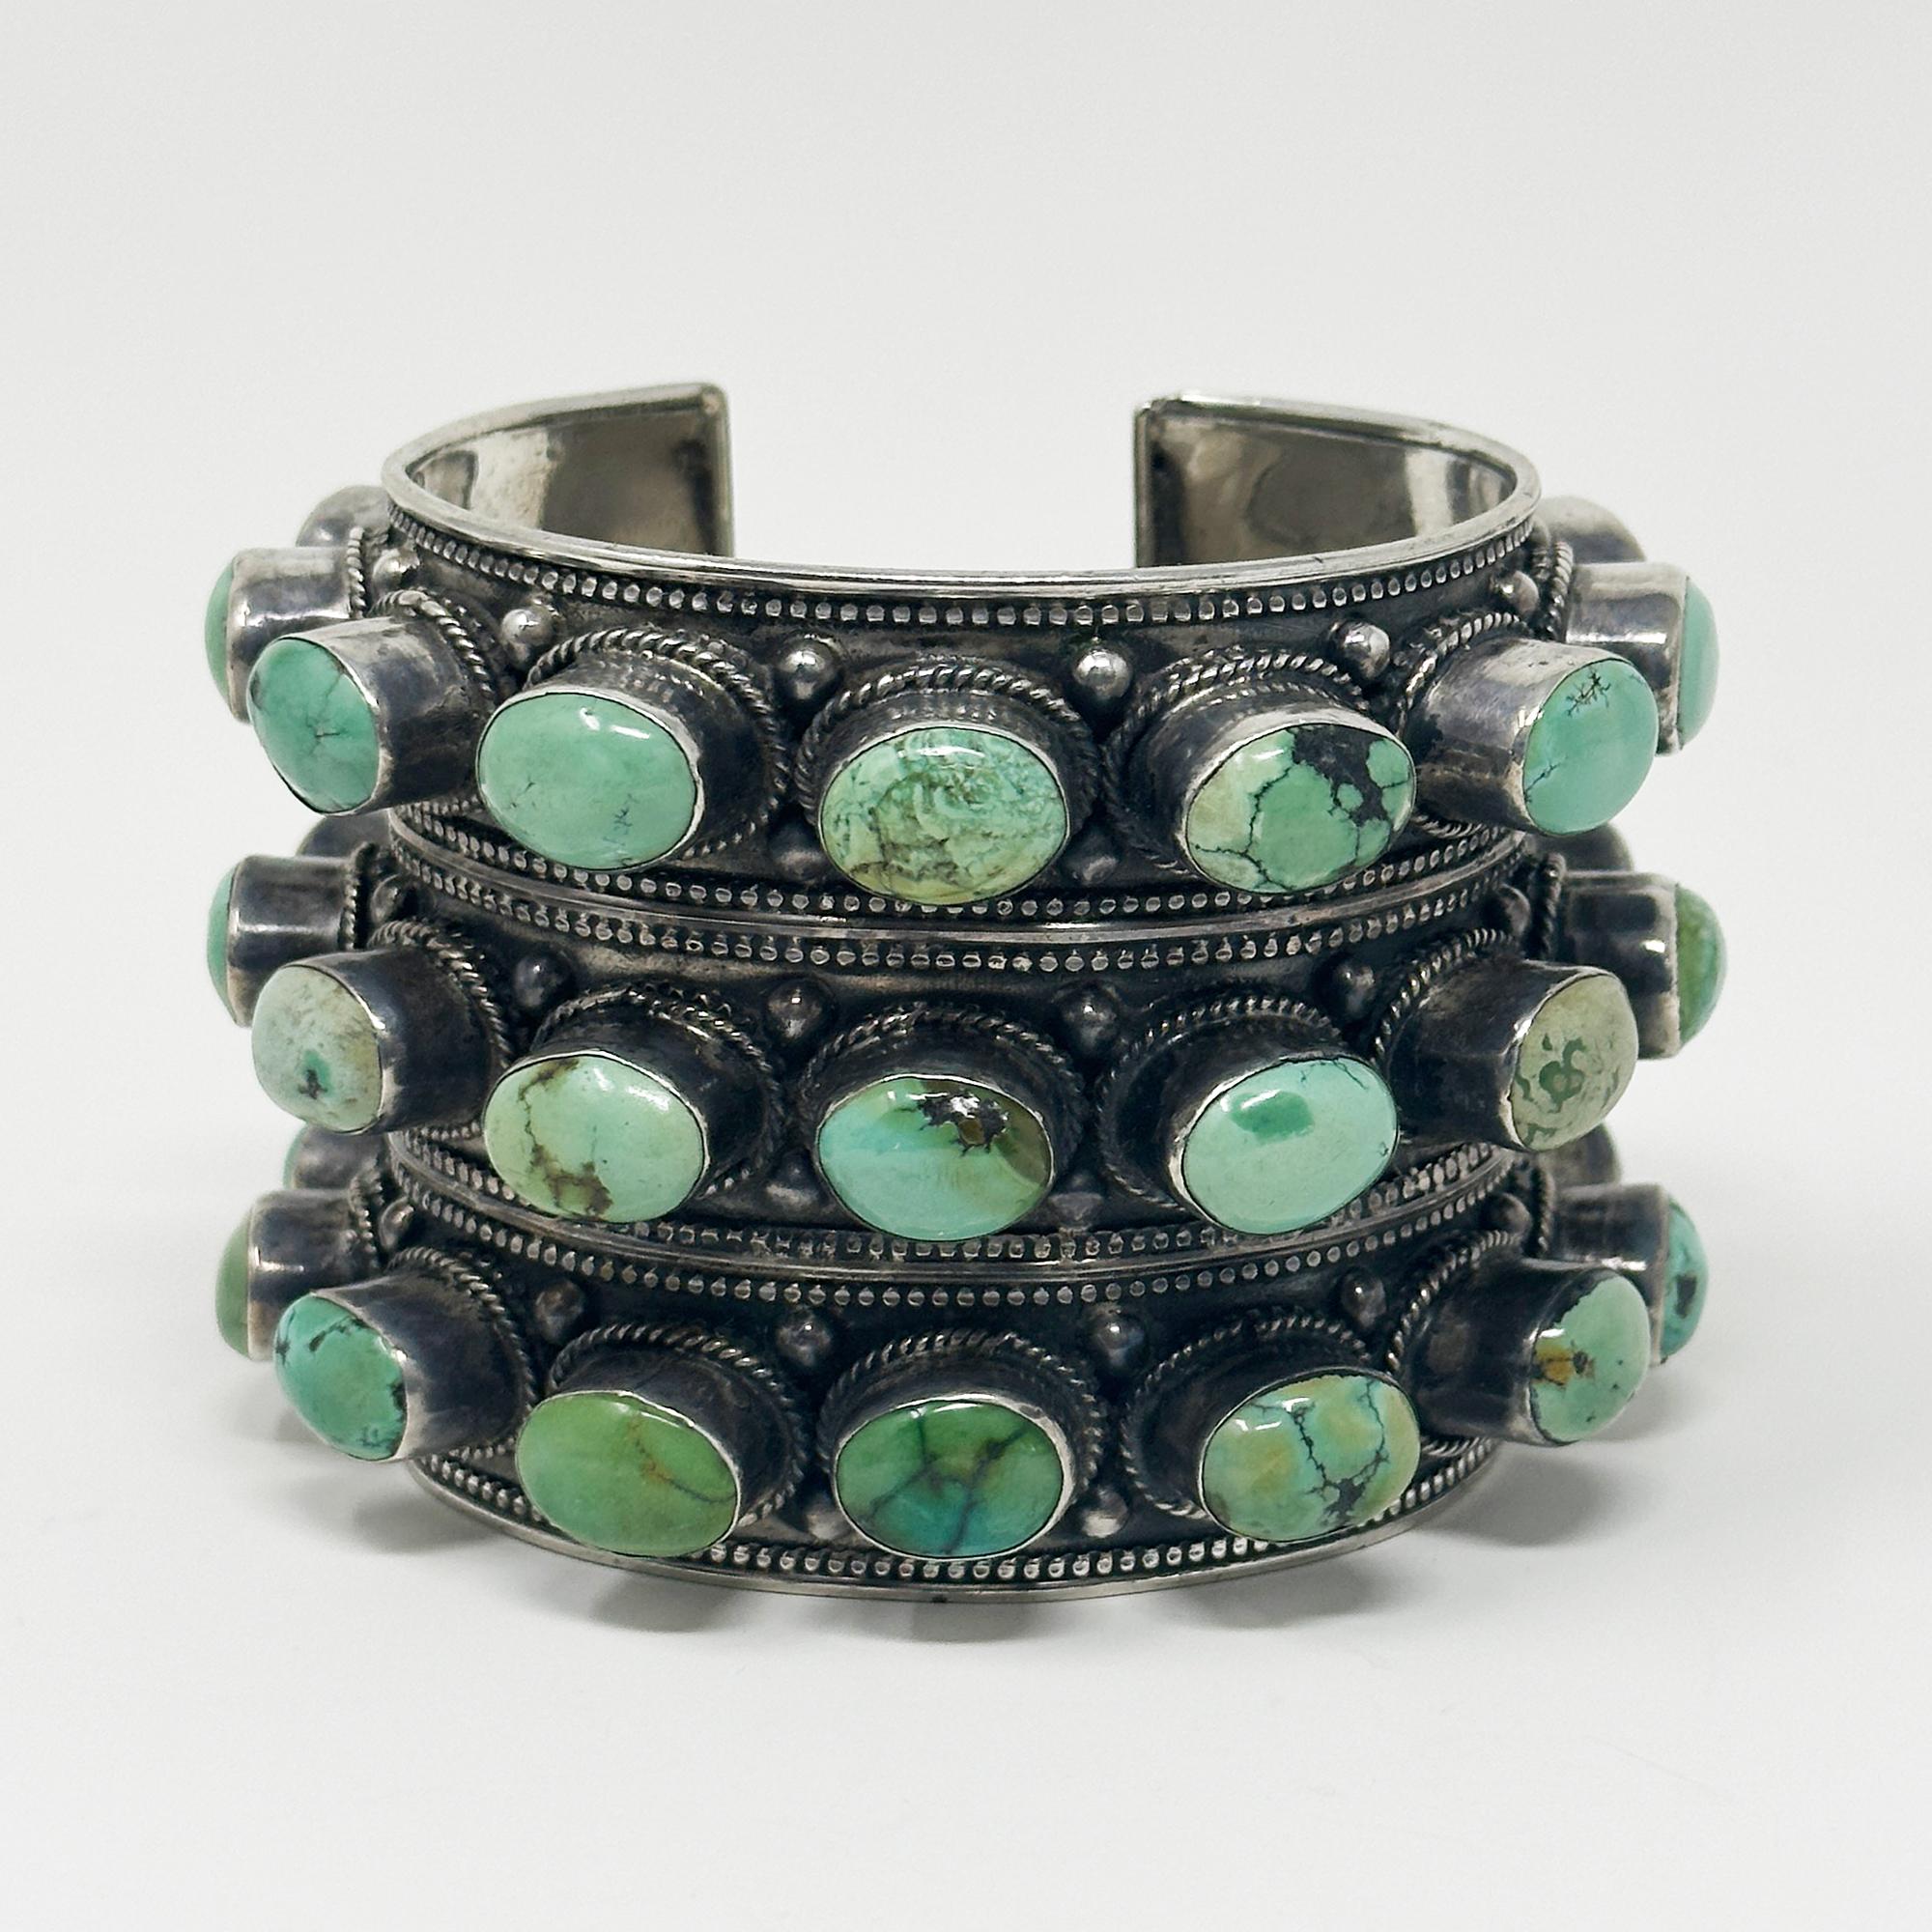 20th century studded silver and turquoise cuff

A huge studded silver and turquoise cuff, made by Nepalese silversmiths in the second half of the 20th century. There are thirty-three oval turquoise cabochons set in three rows  It measures 2.5 inches